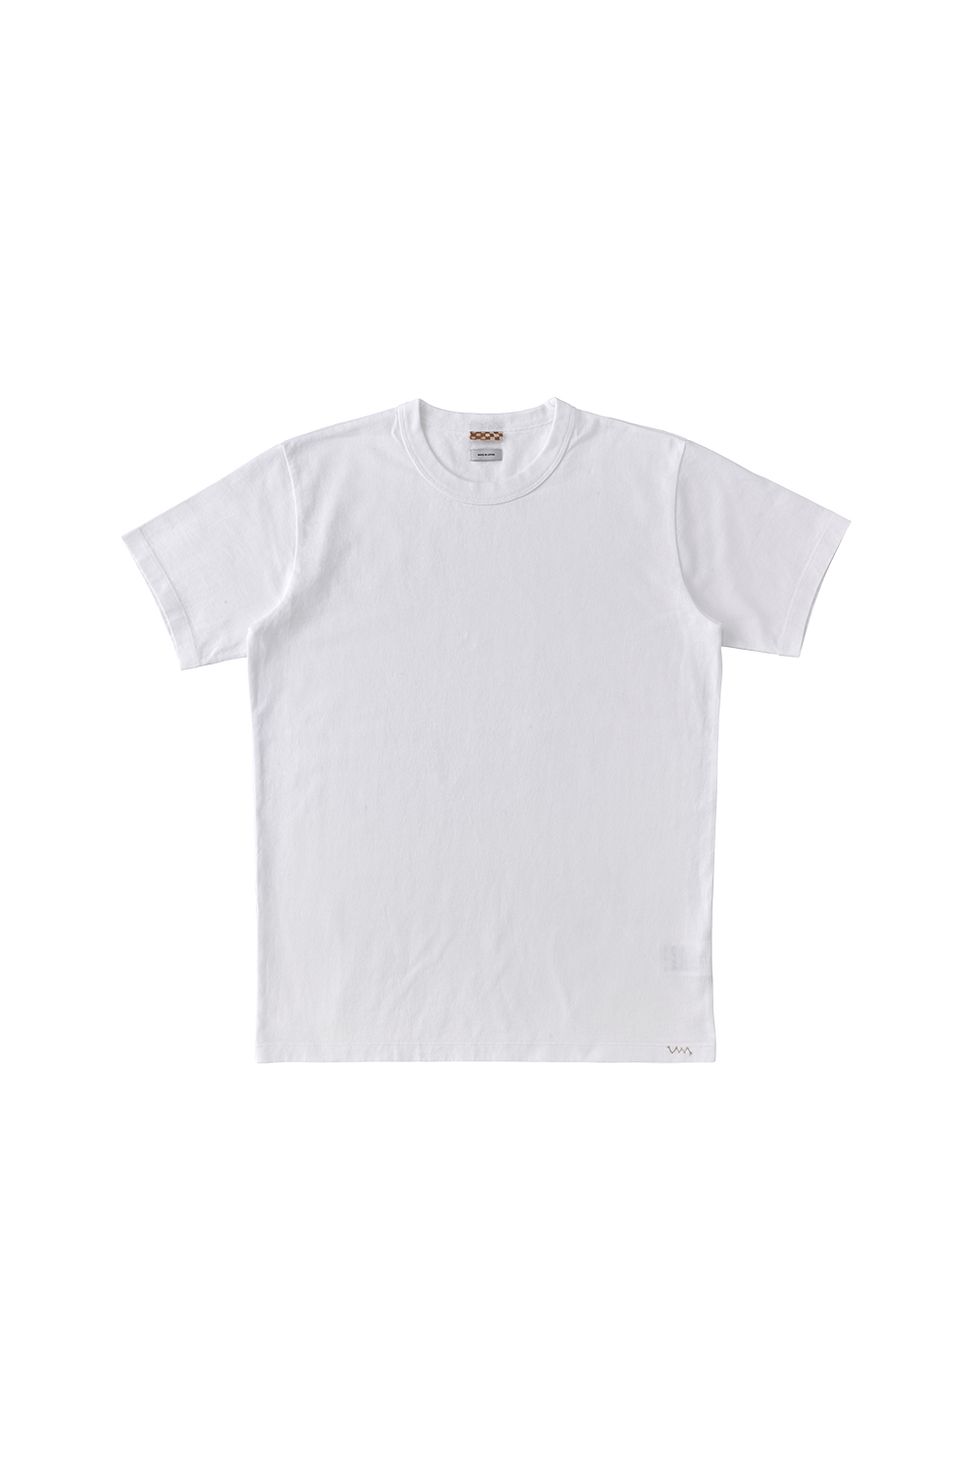 <p>This WMV/Visvim T-shirt, made in Japan from the softest slubbed cotton jersey, is worth the investment. It's cut square, like a men's tee, but with a closer silhouette—not boxy—covers just the right amount of upper arm, and is long enough to tuck in without being oversize. I tuck everything in—the higher waist makes legs seem so much longer.
</p><p><i data-redactor-tag="i">Cotton T-shirt, WMV/ VISVIM, $215, collection at lagarconne.com</i></p>